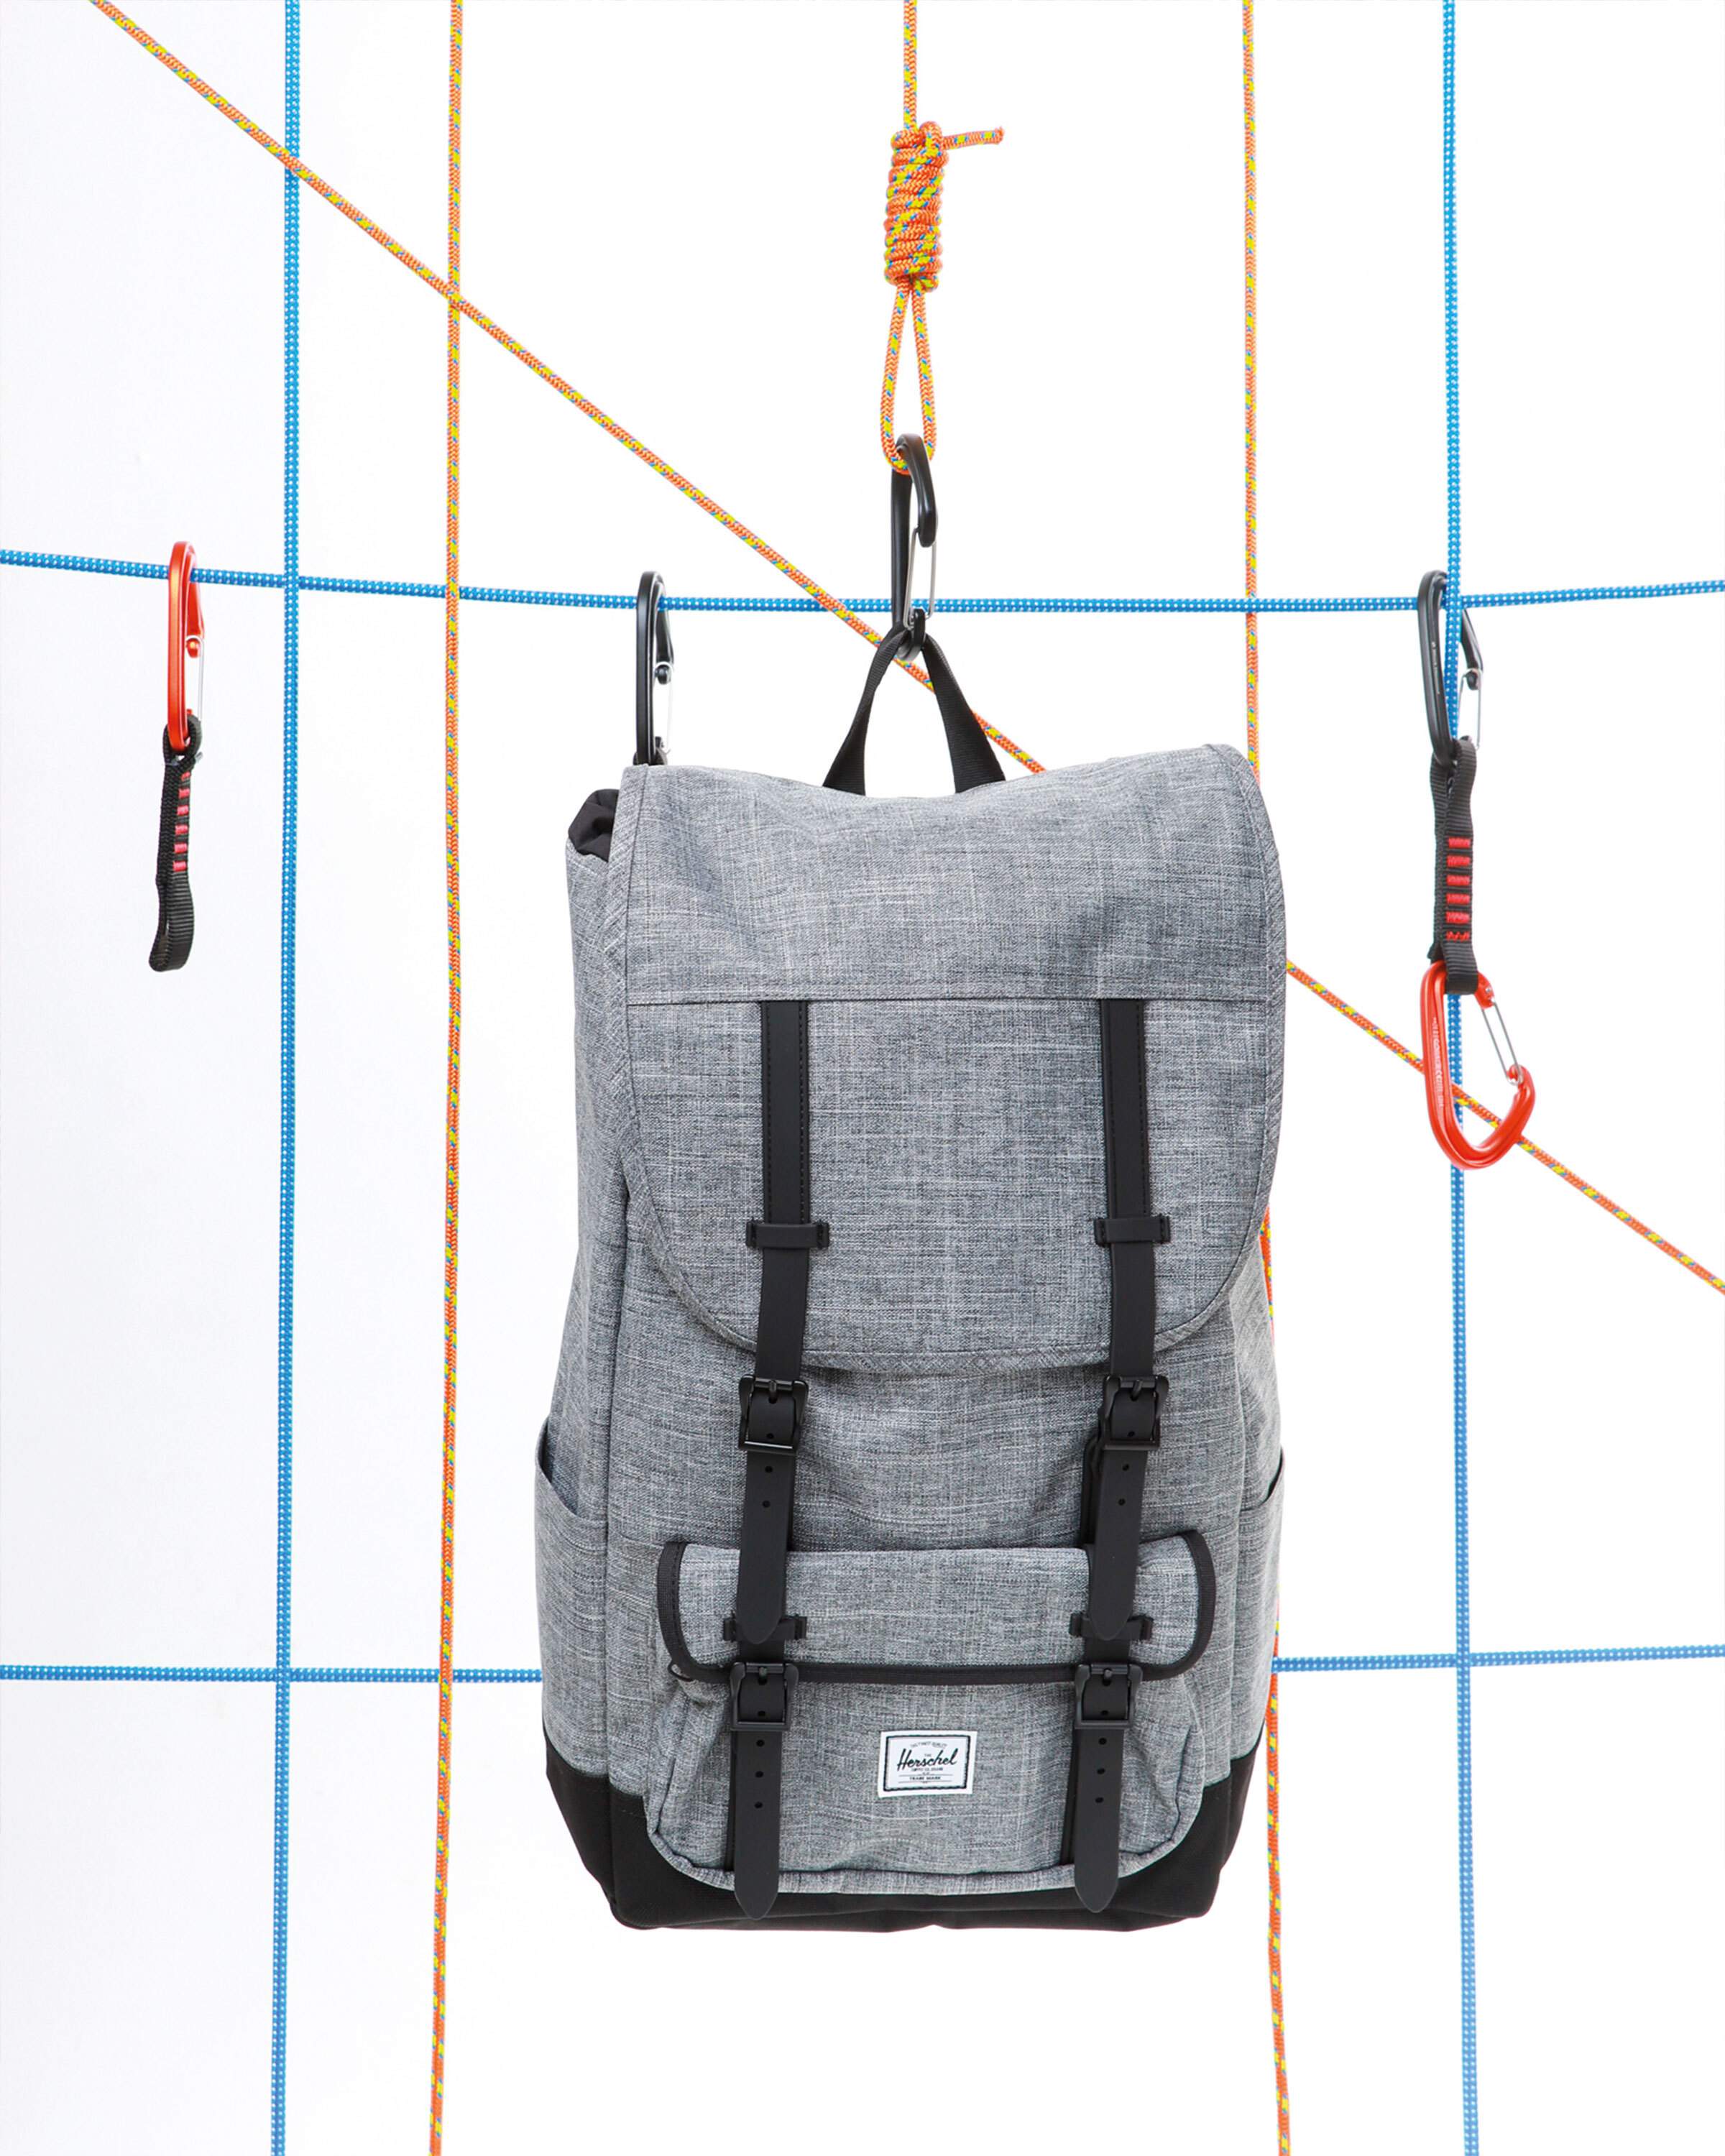 Pack your bags with Herschel